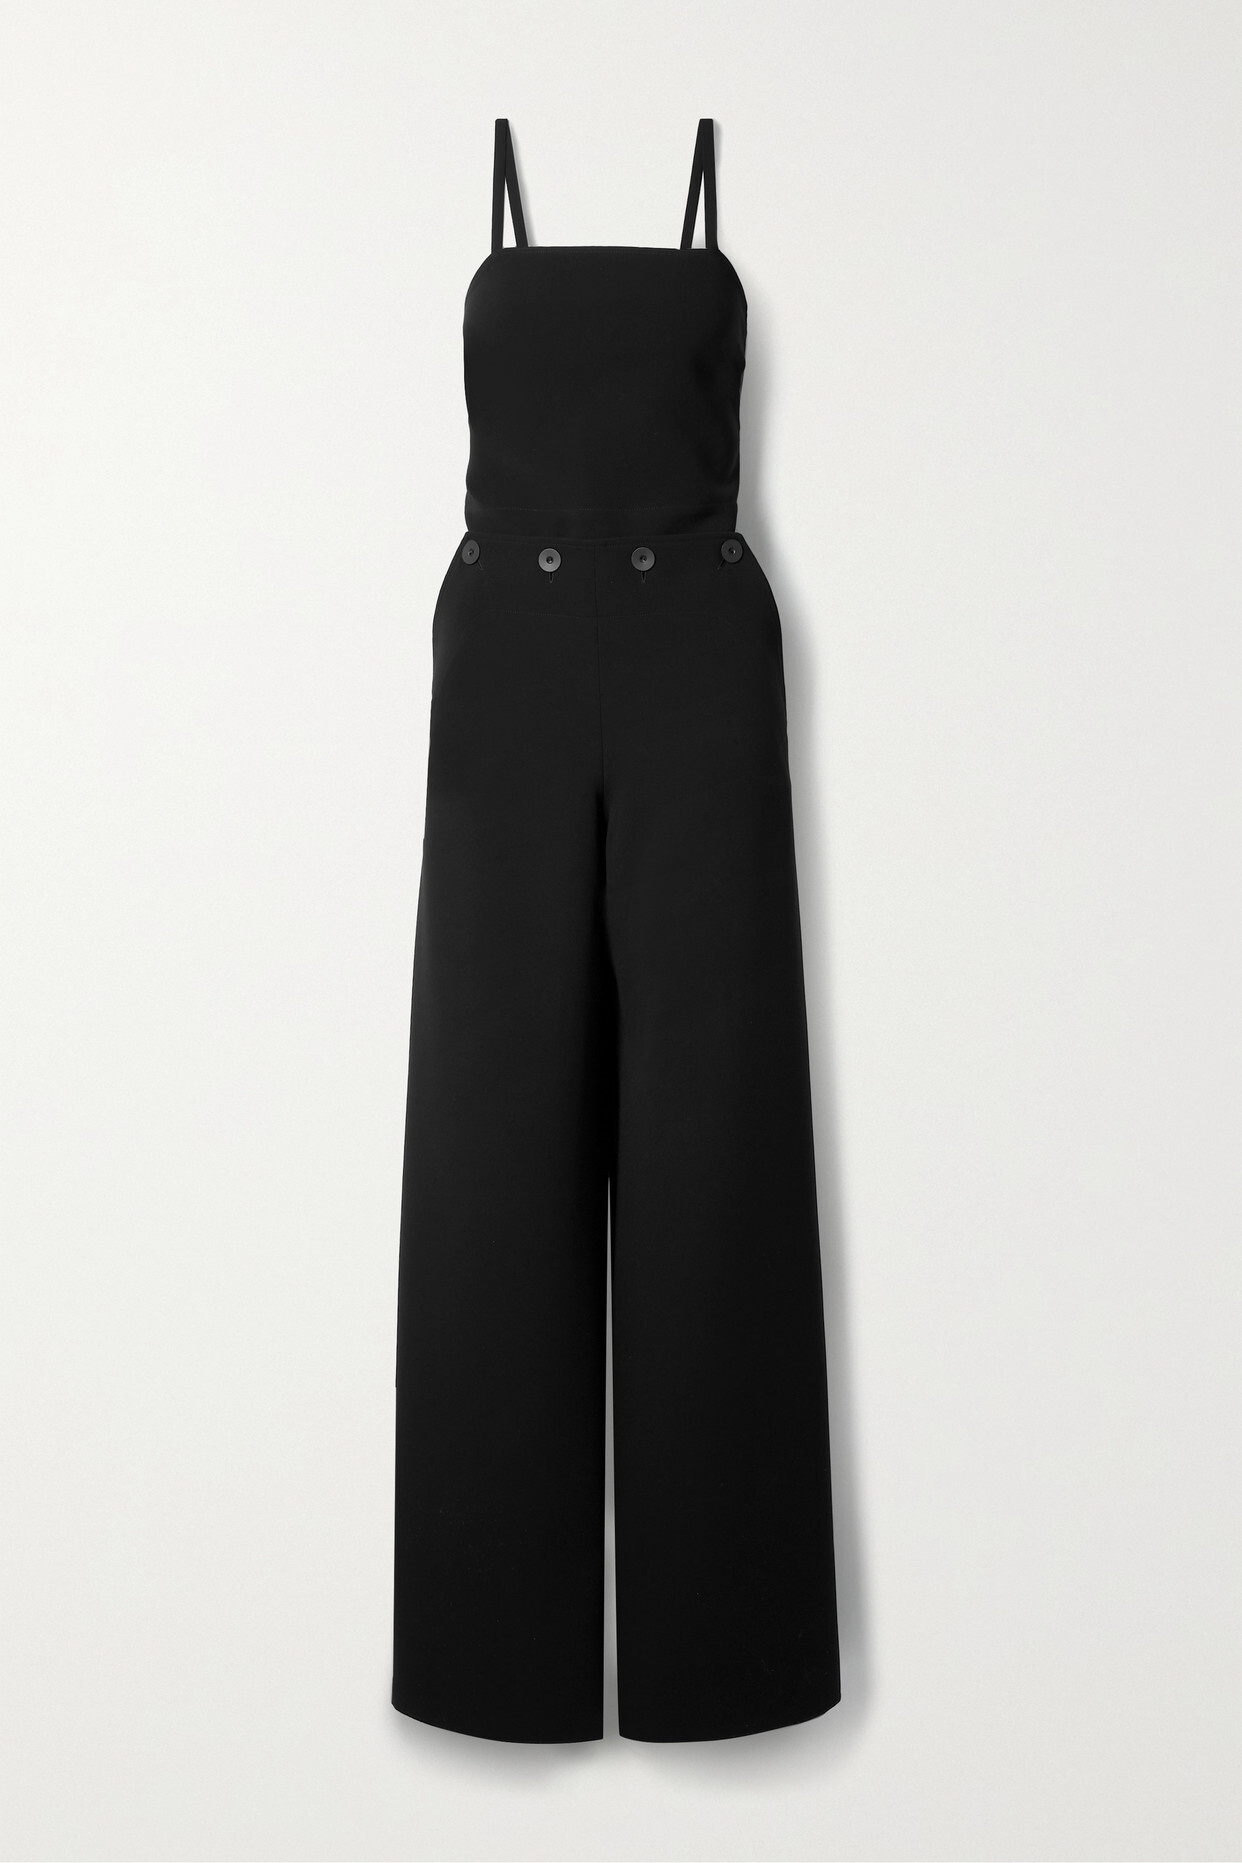 Max Mara - Tabarin Button-embellished Open-back Cady Jumpsuit - Black